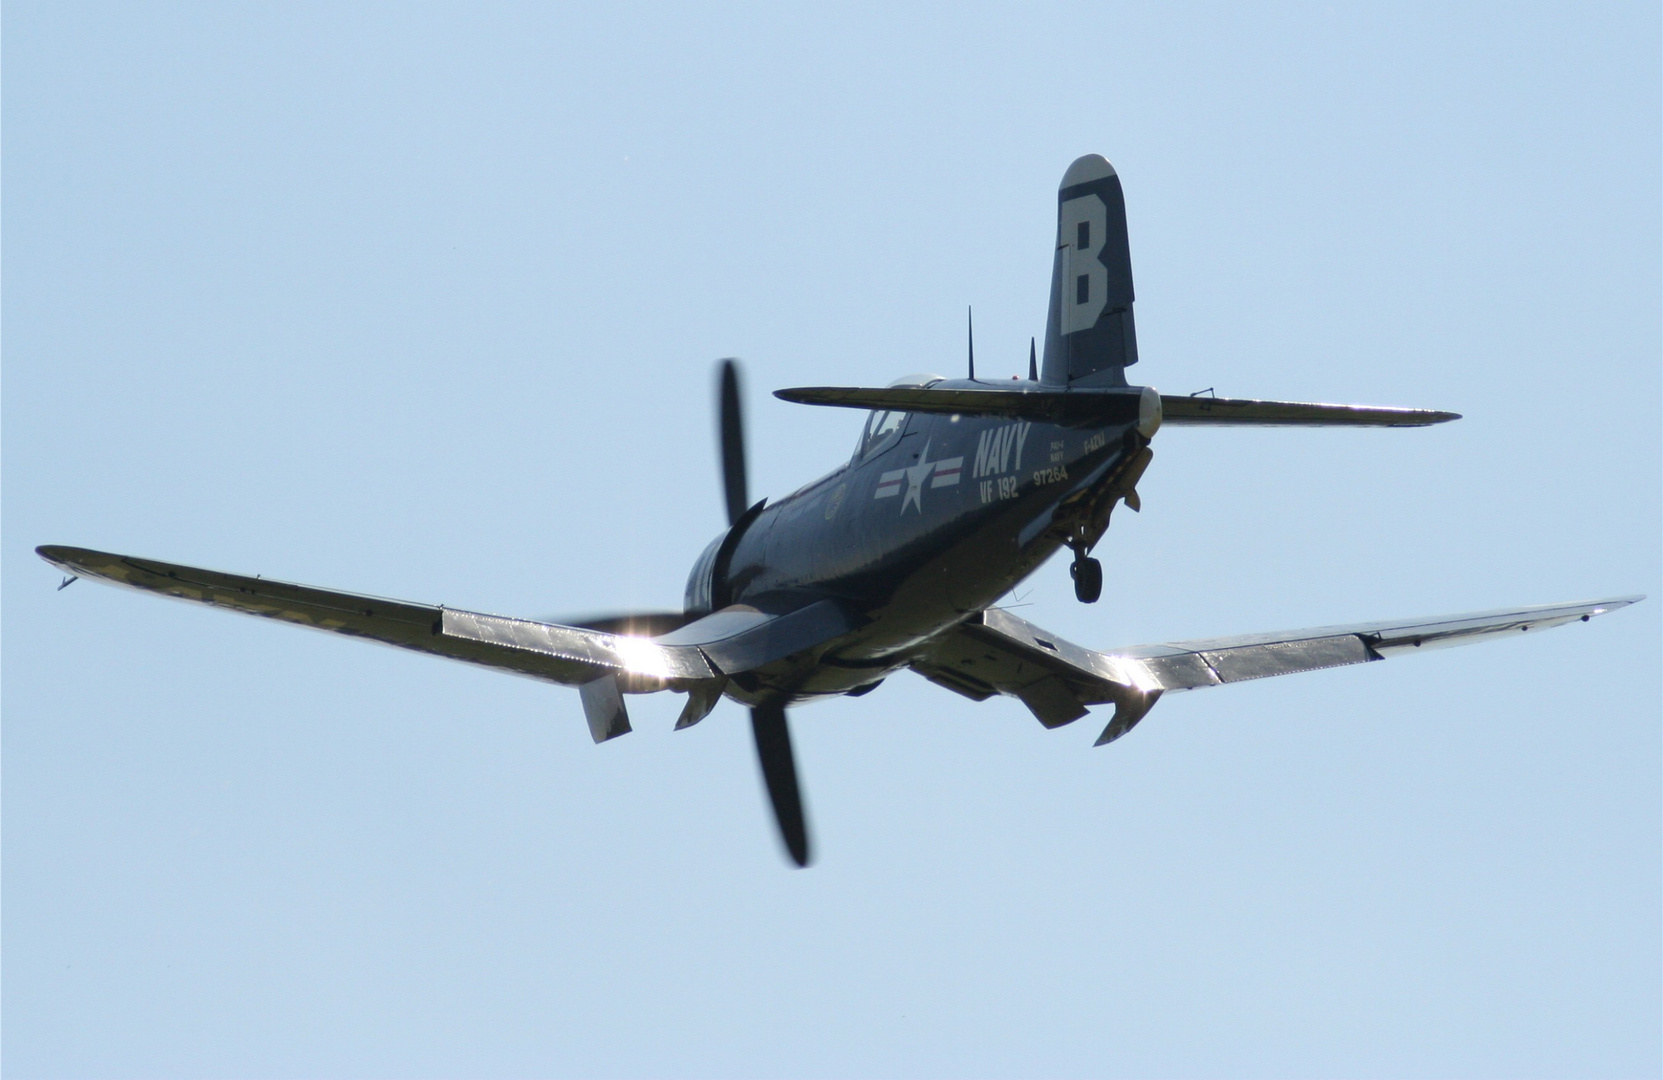 Up and away: Die Chance Vought F4U "Corsair"